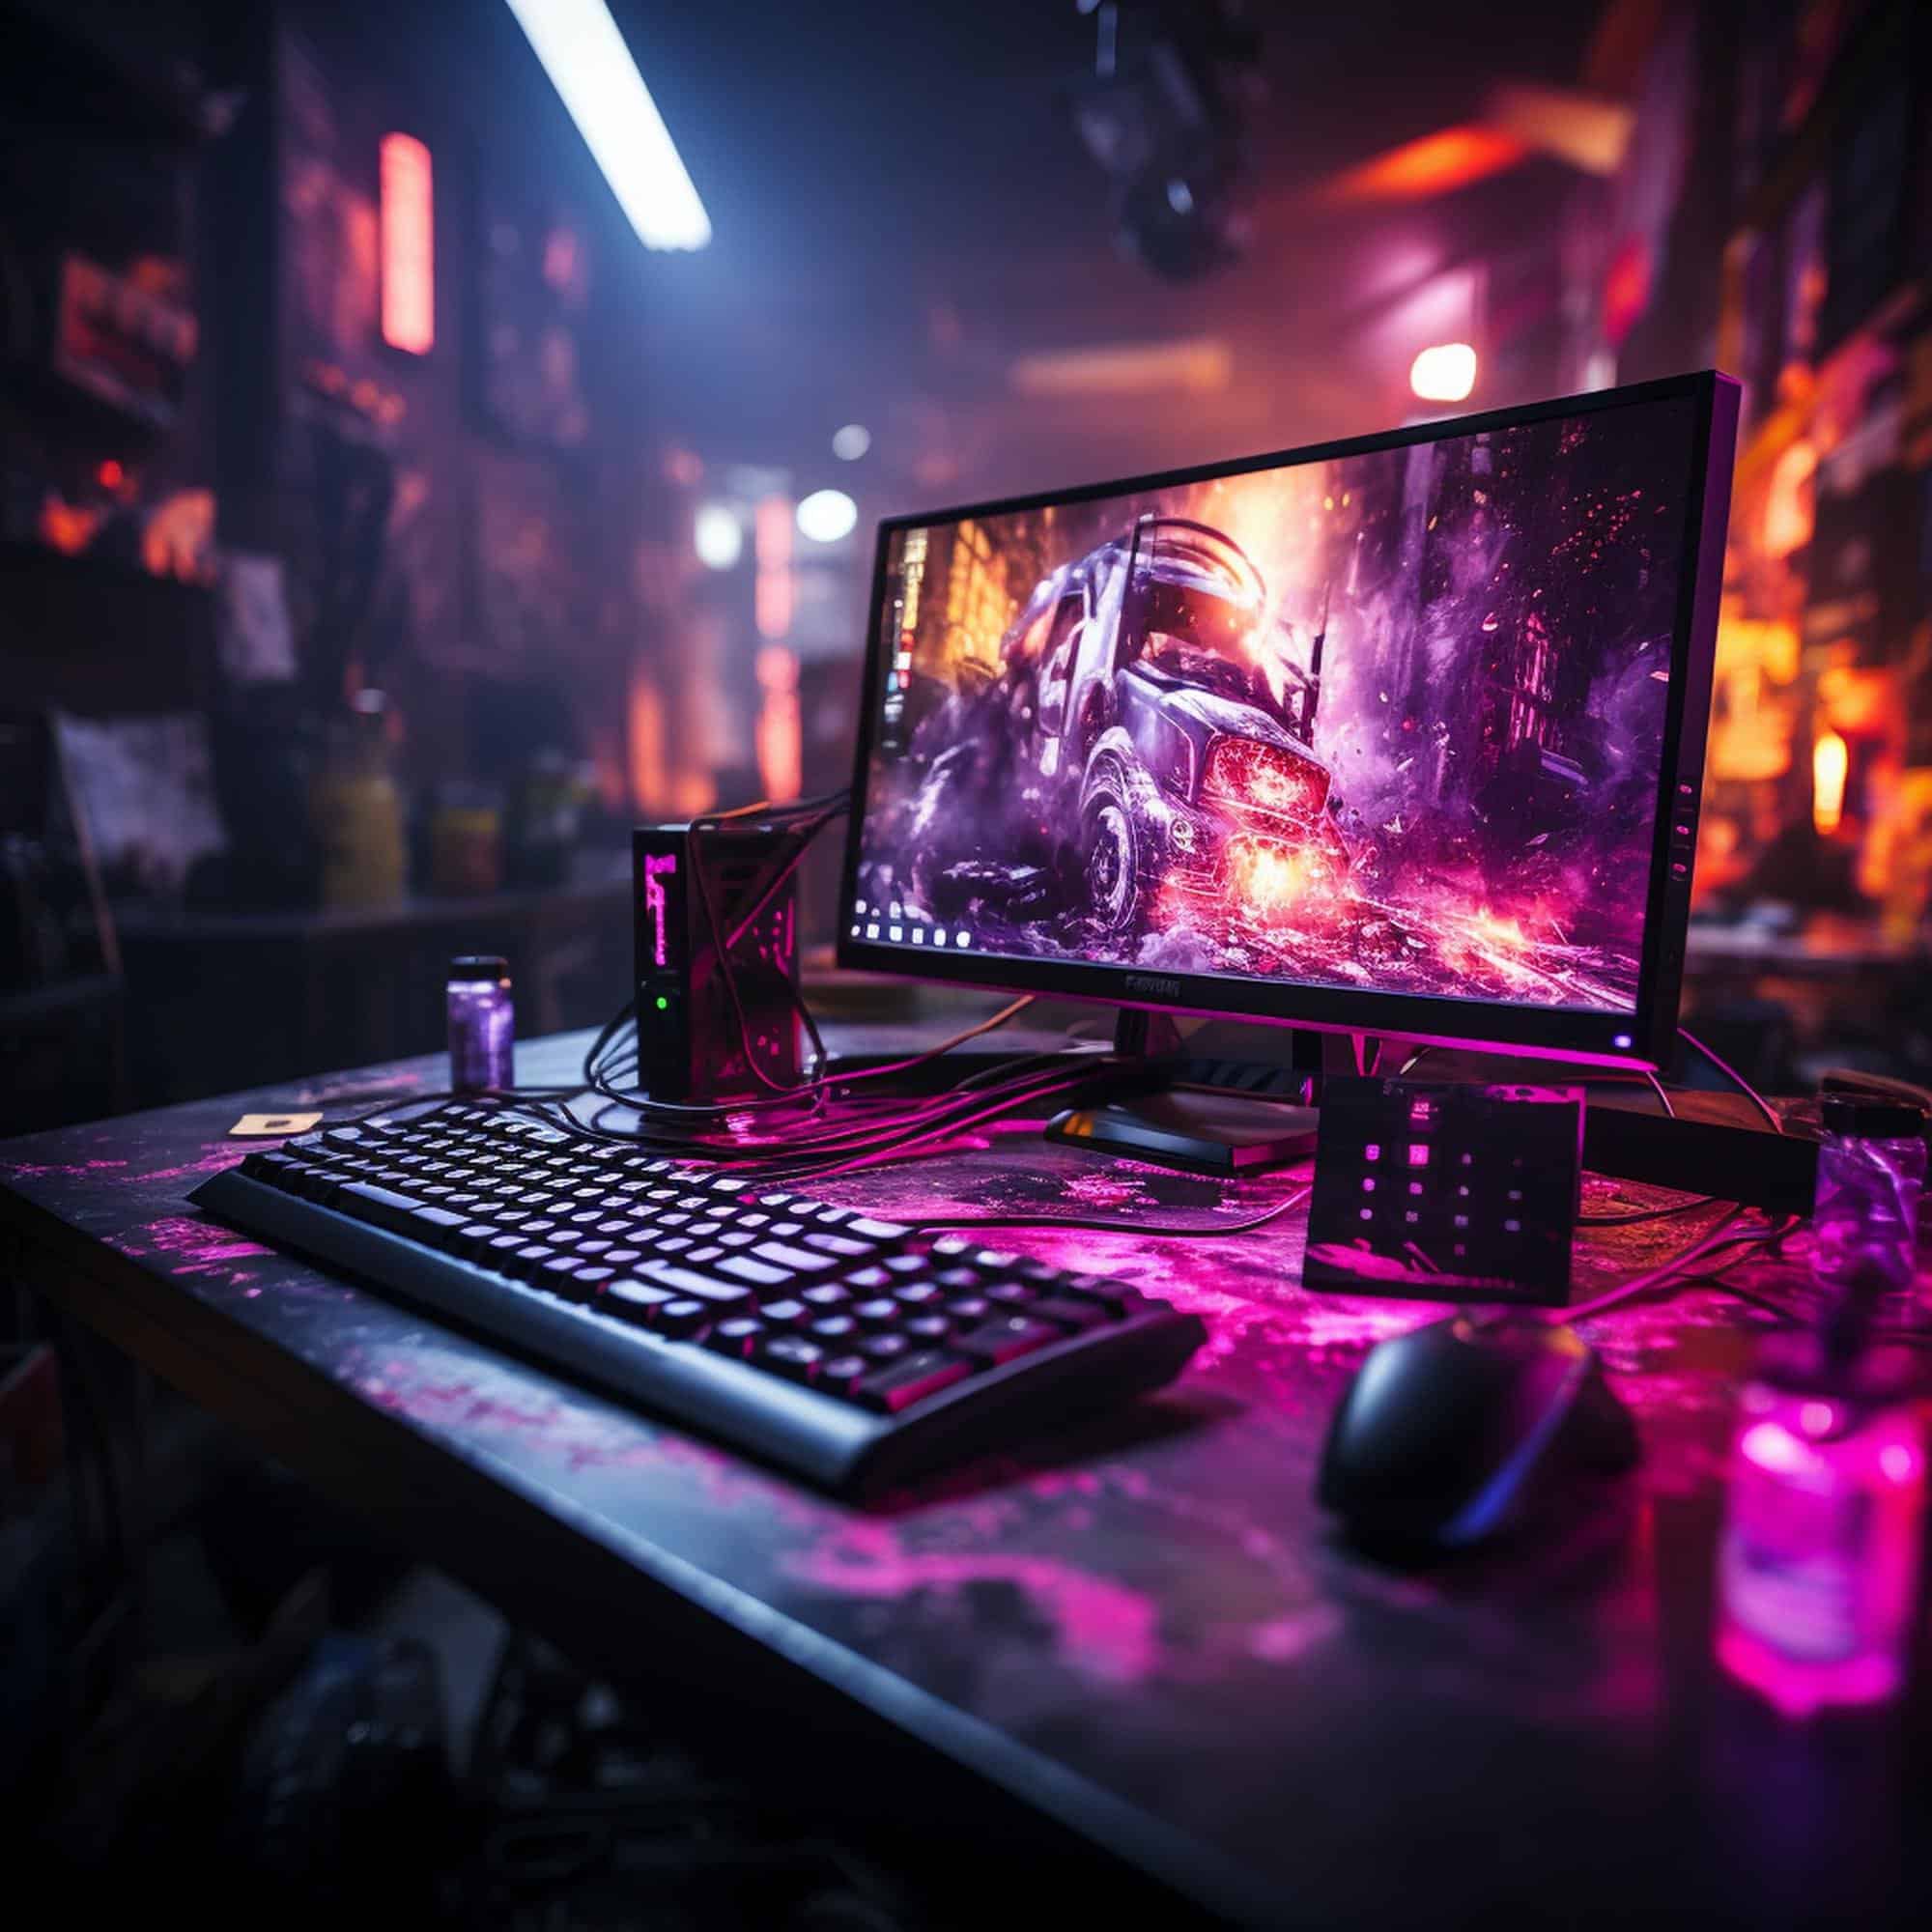 How to Optimize Your PC for Gaming